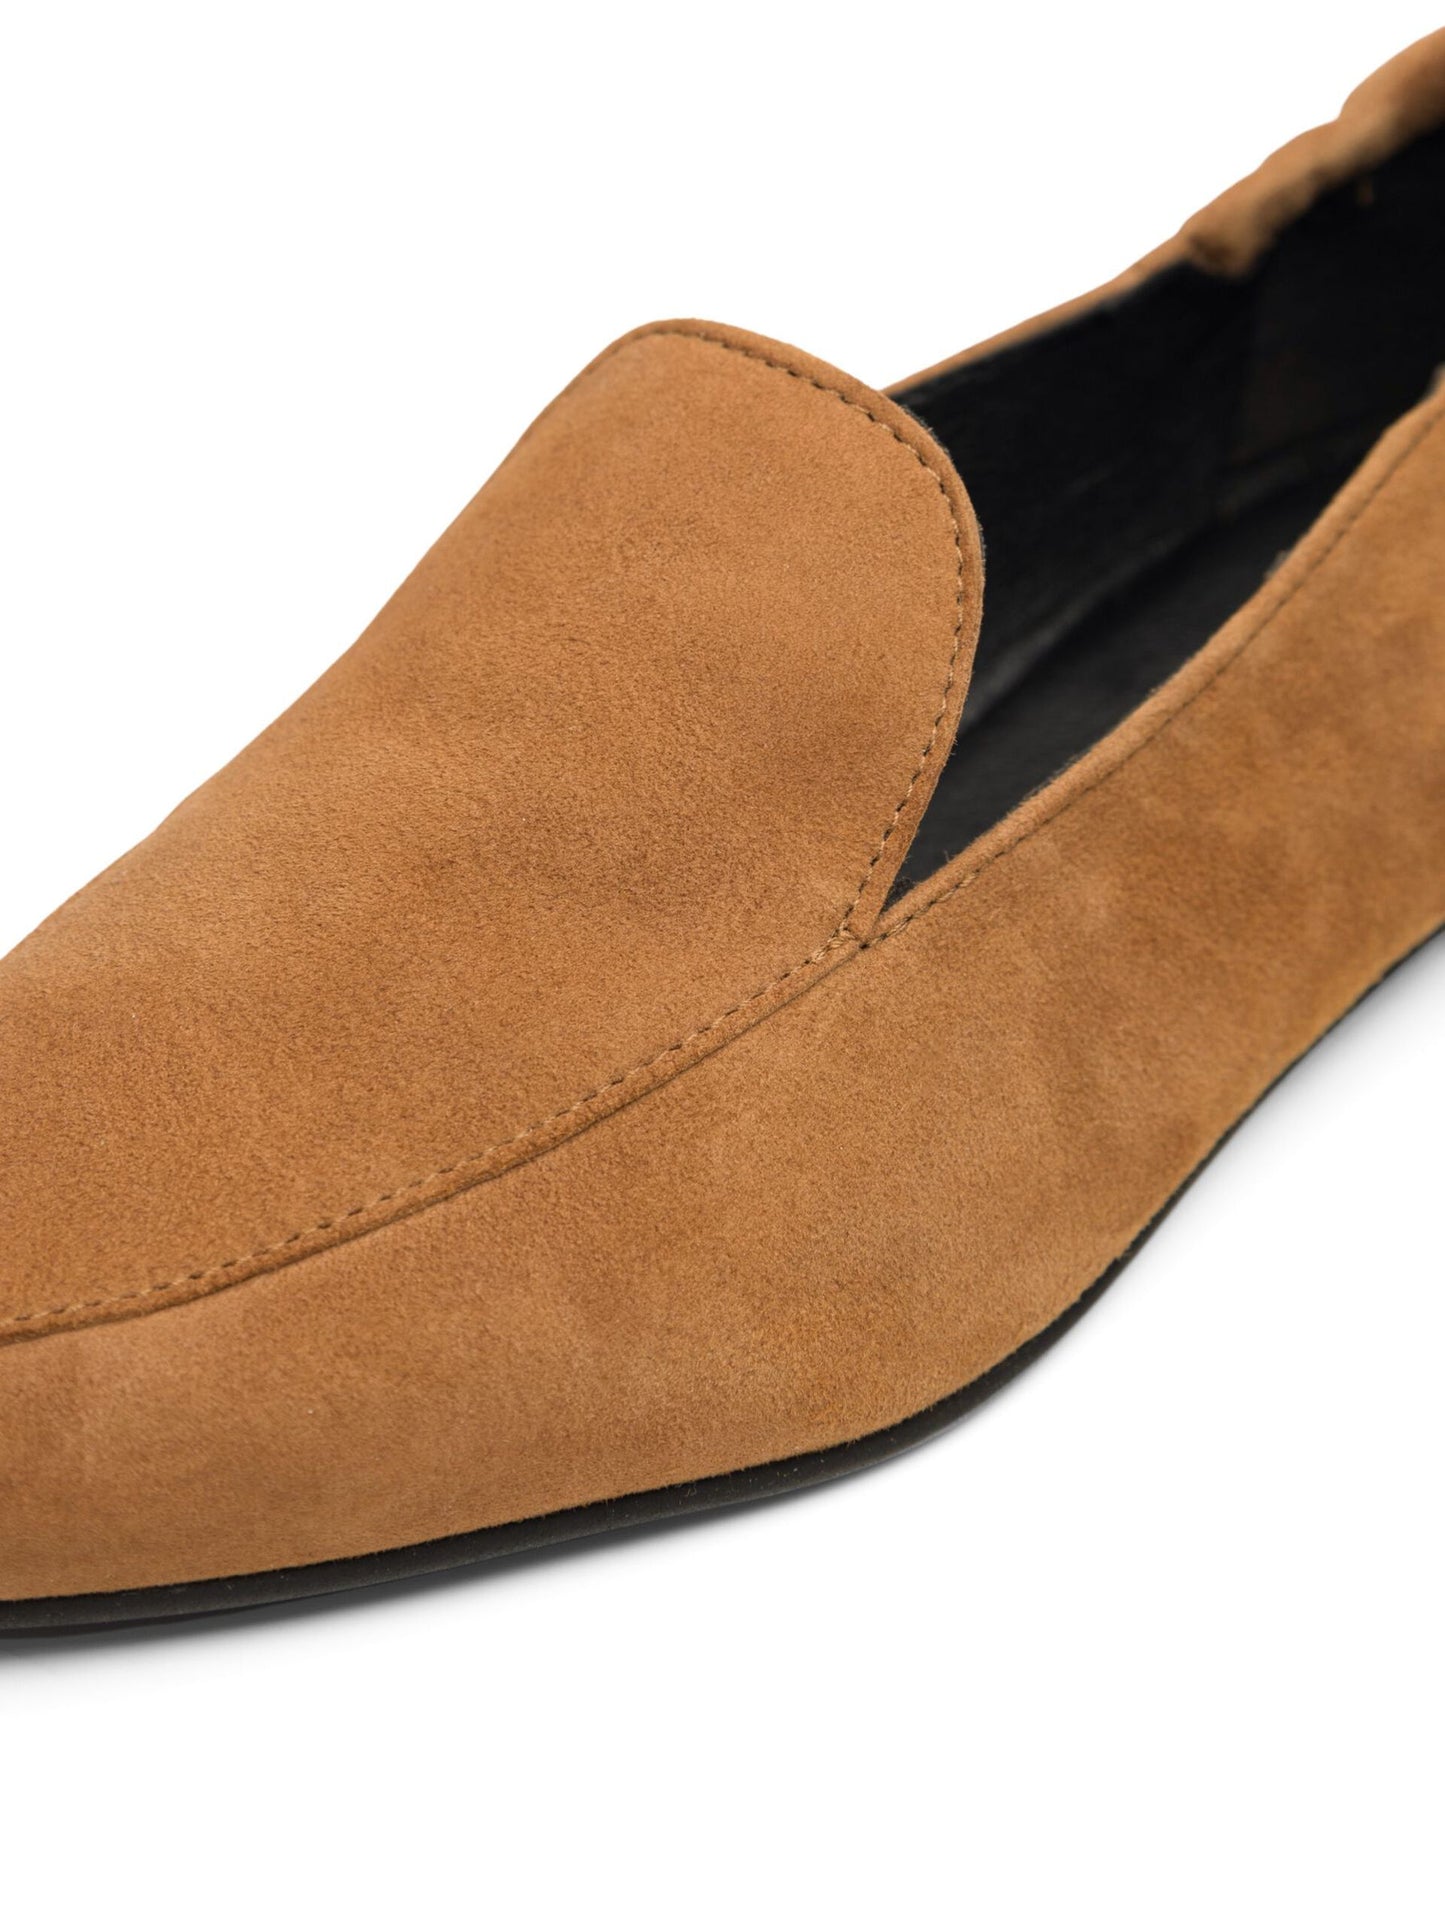 Bianco Tracy Suede Cognac Loafers